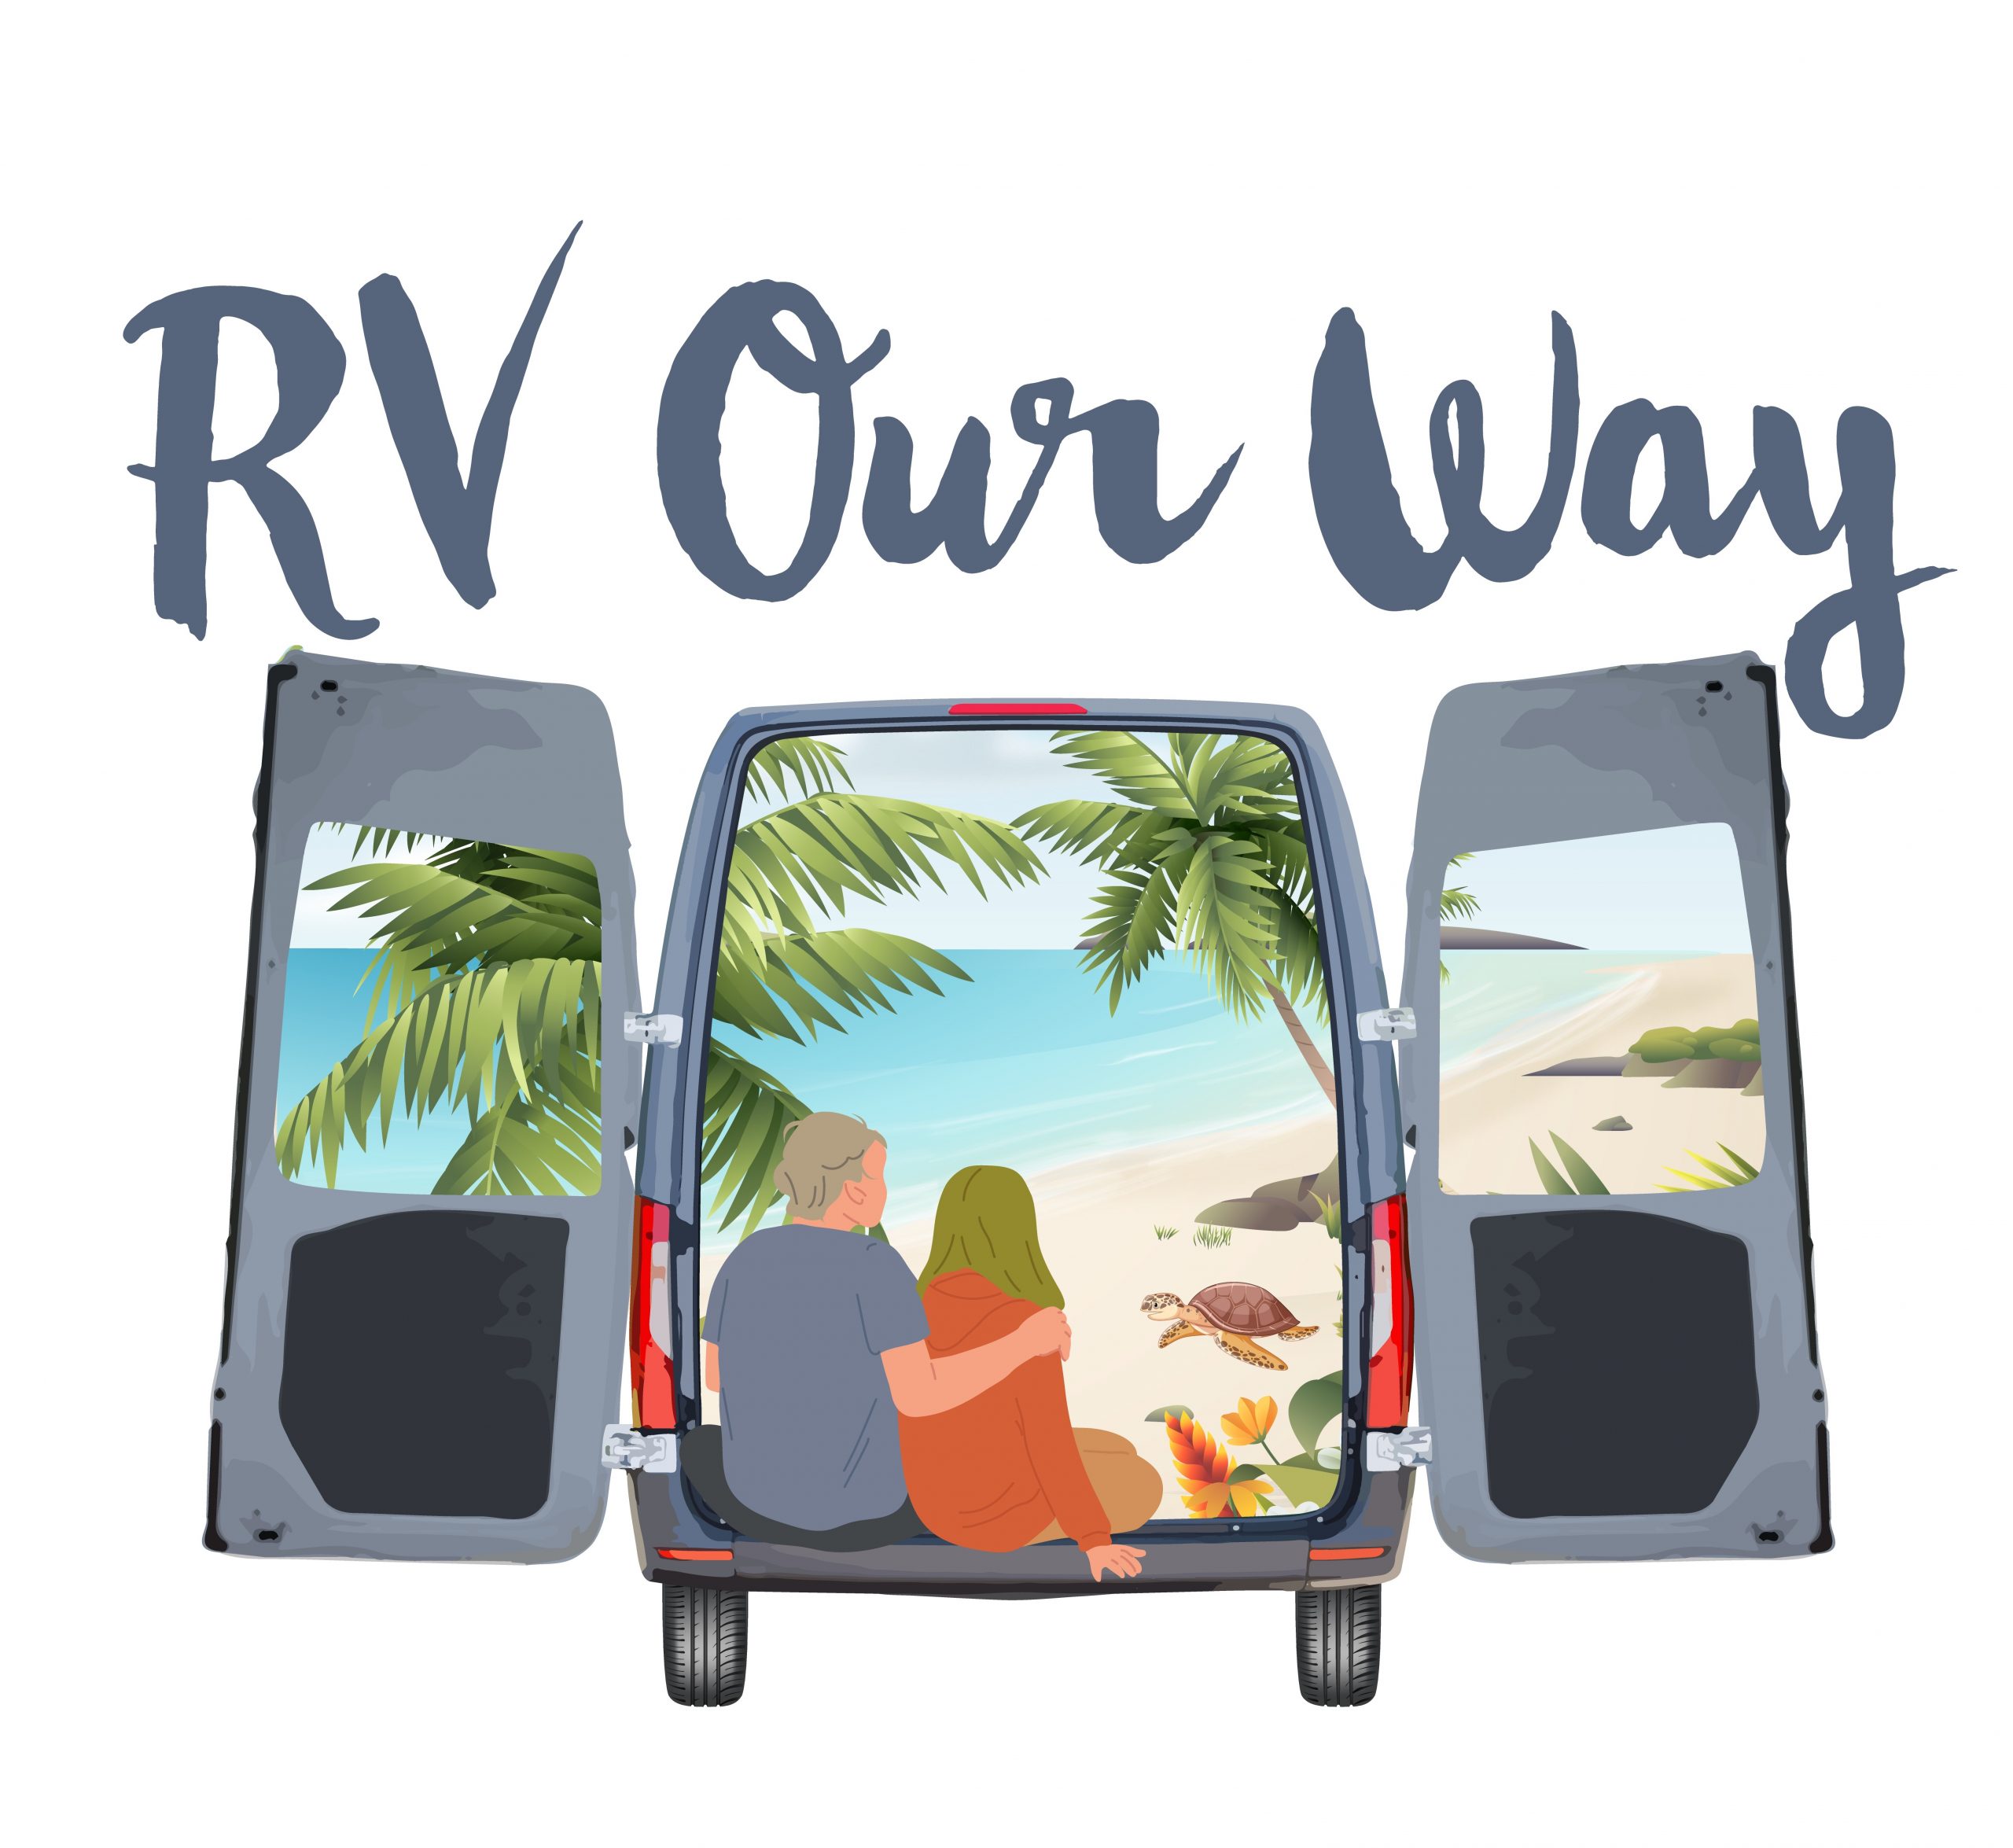 RV Our Way